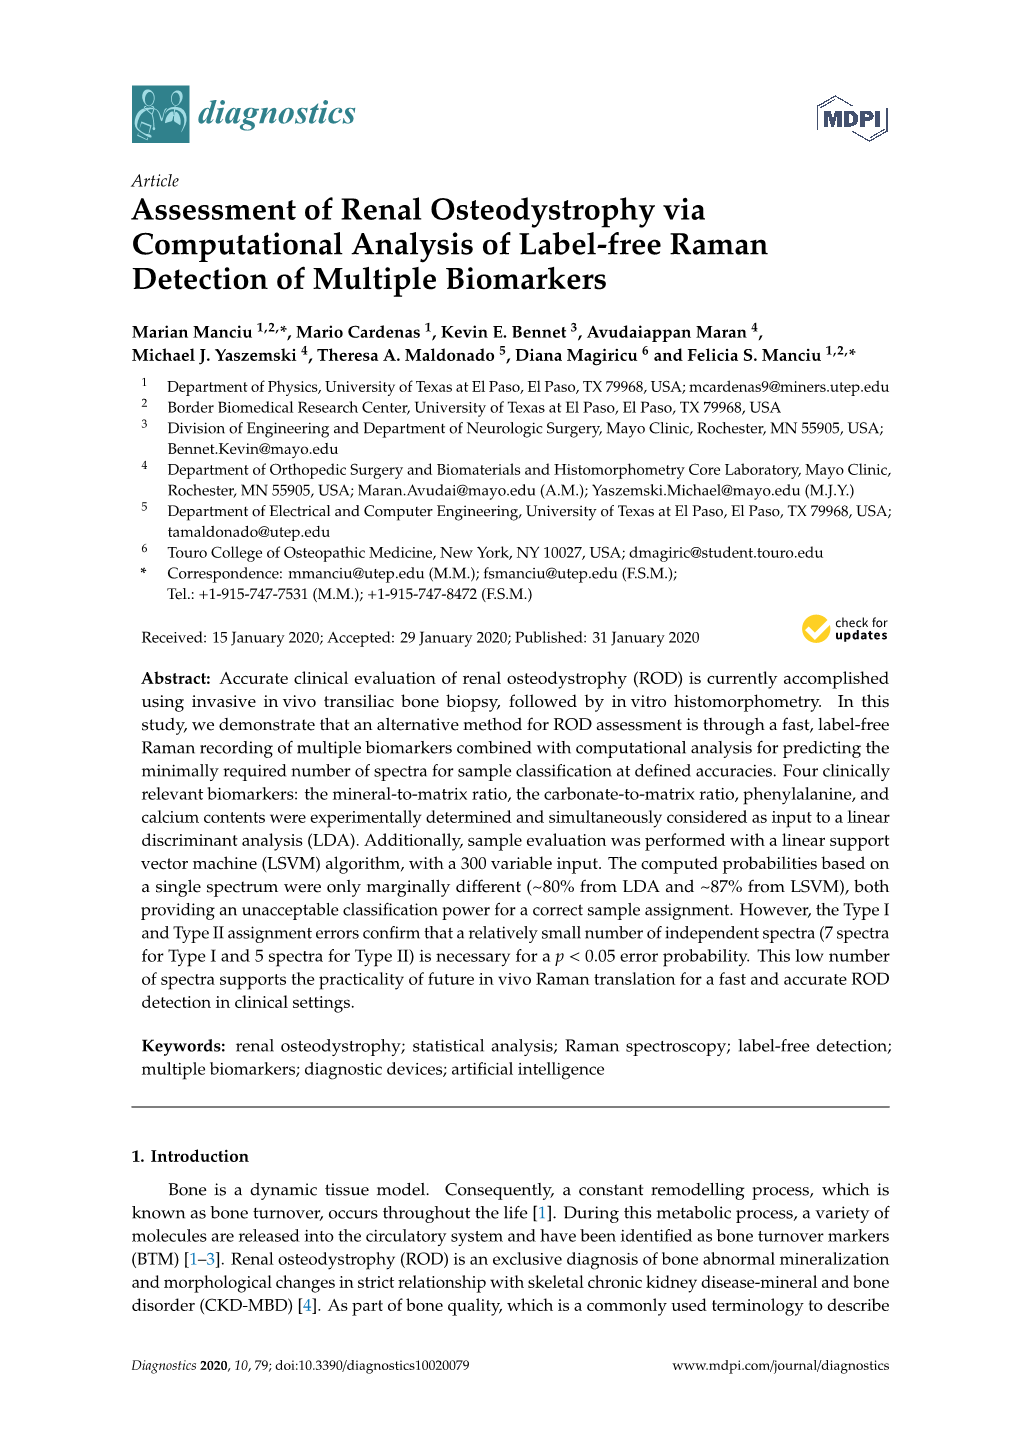 Assessment of Renal Osteodystrophy Via Computational Analysis of Label-Free Raman Detection of Multiple Biomarkers